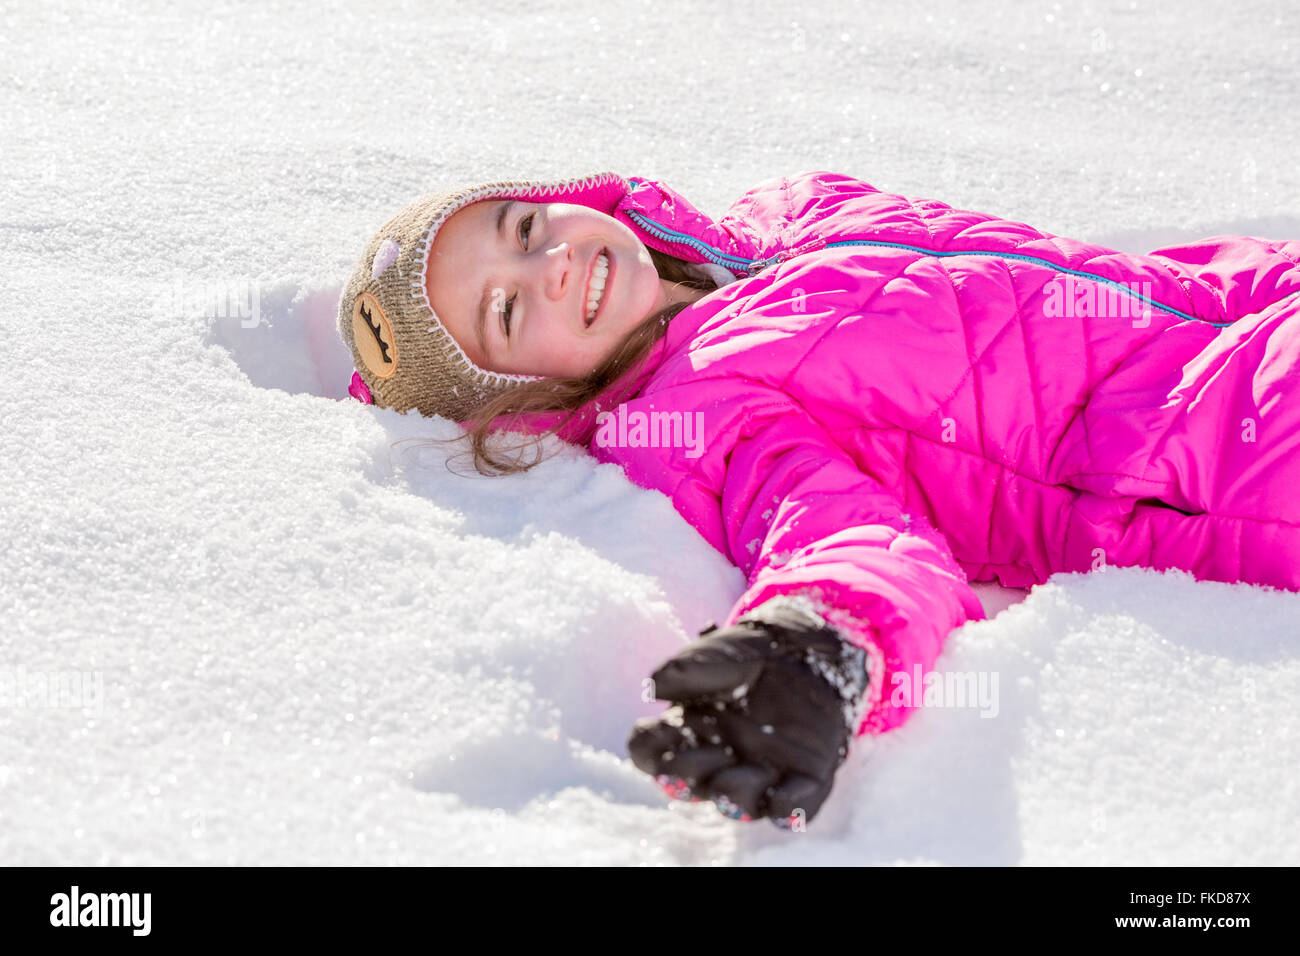 Girl (10-11) in pink jacket lying in snow Stock Photo